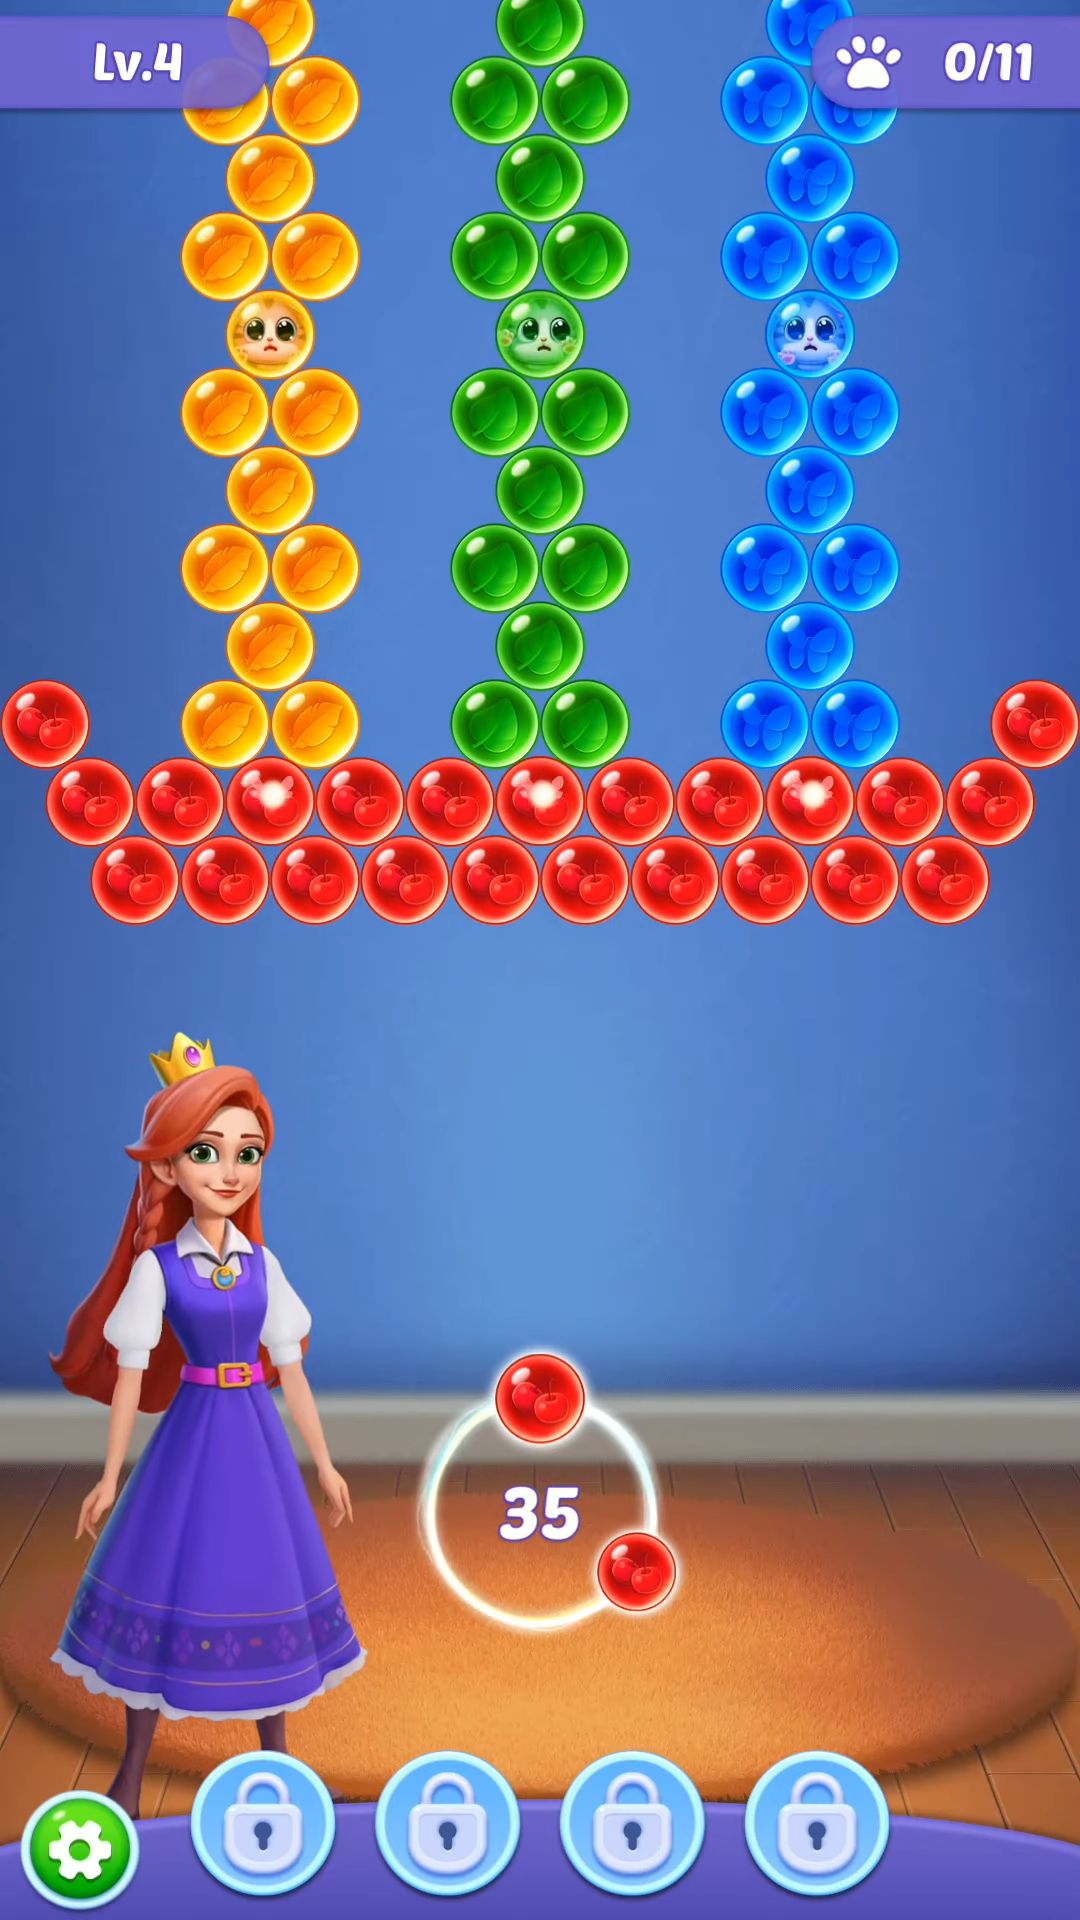 Download Bubble games for Android